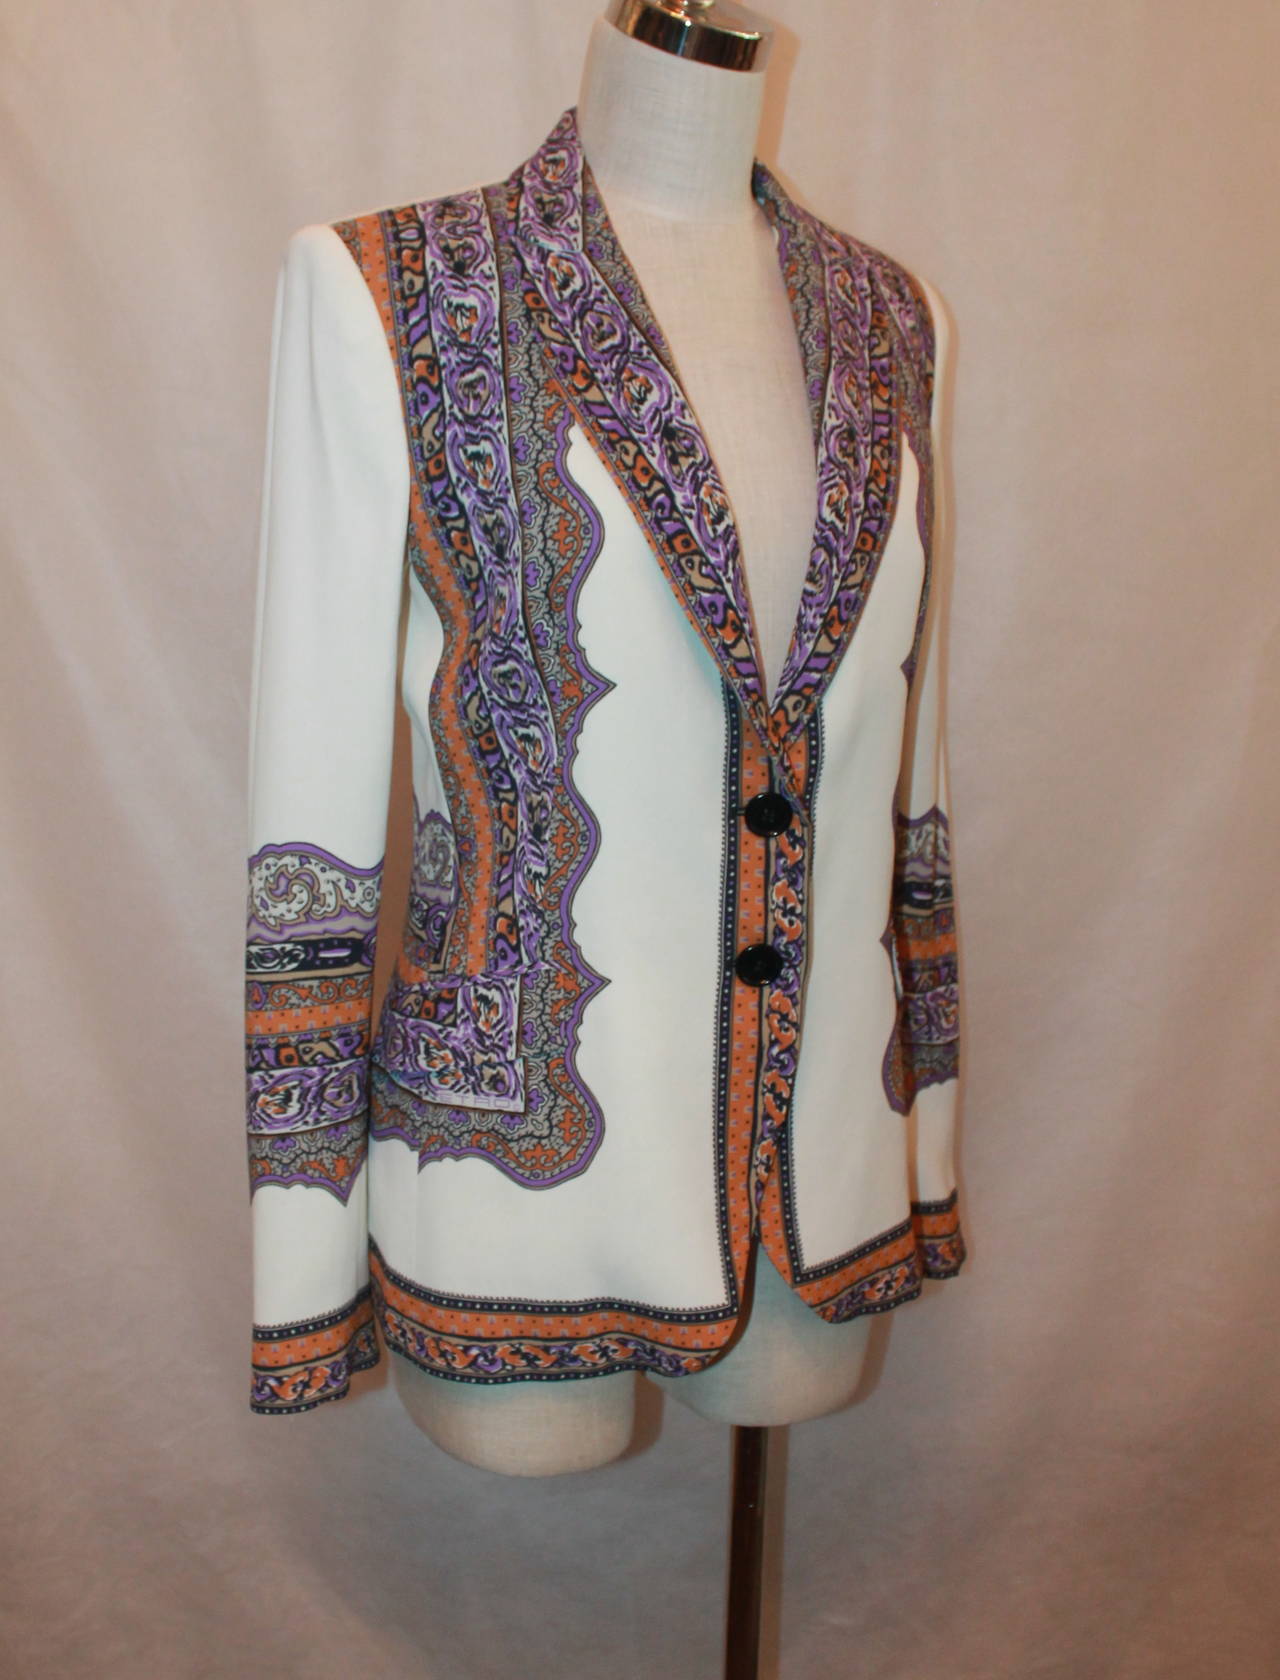 Etro White & Multi Color Printed Silk Jacket - 44. This jacket is in very good condition with light use. The print is orange, purple, and black with a white background. It has a very slight stain by the back of the neck on the left.